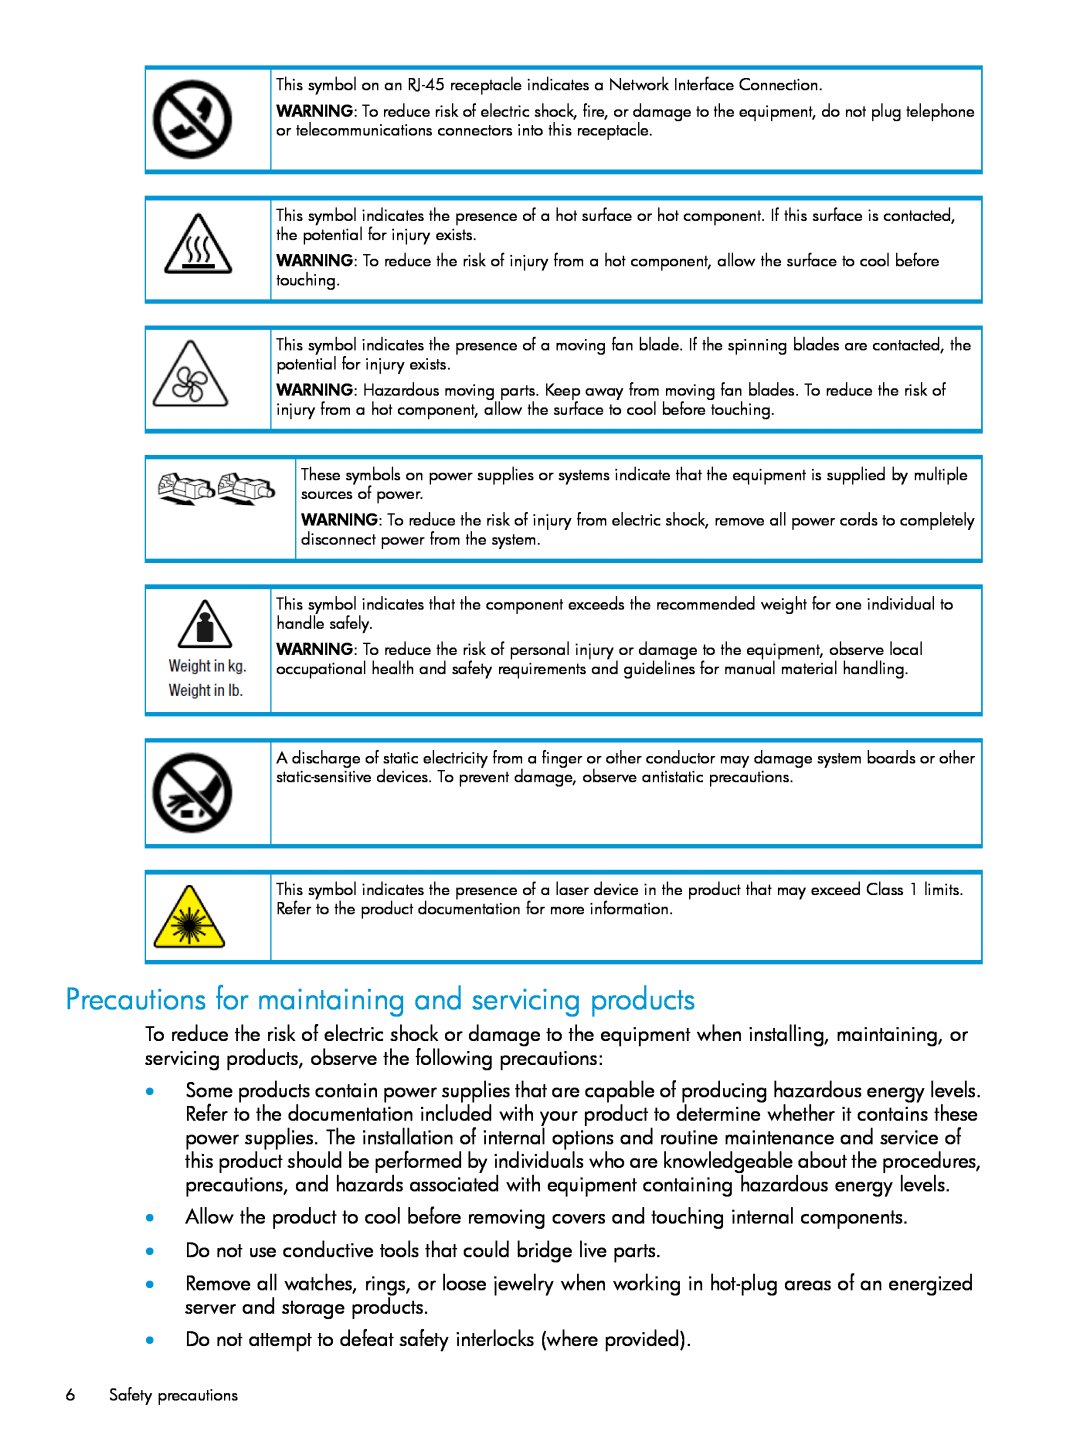 HP Networking Safety and Compliance manual Precautions for maintaining and servicing products 